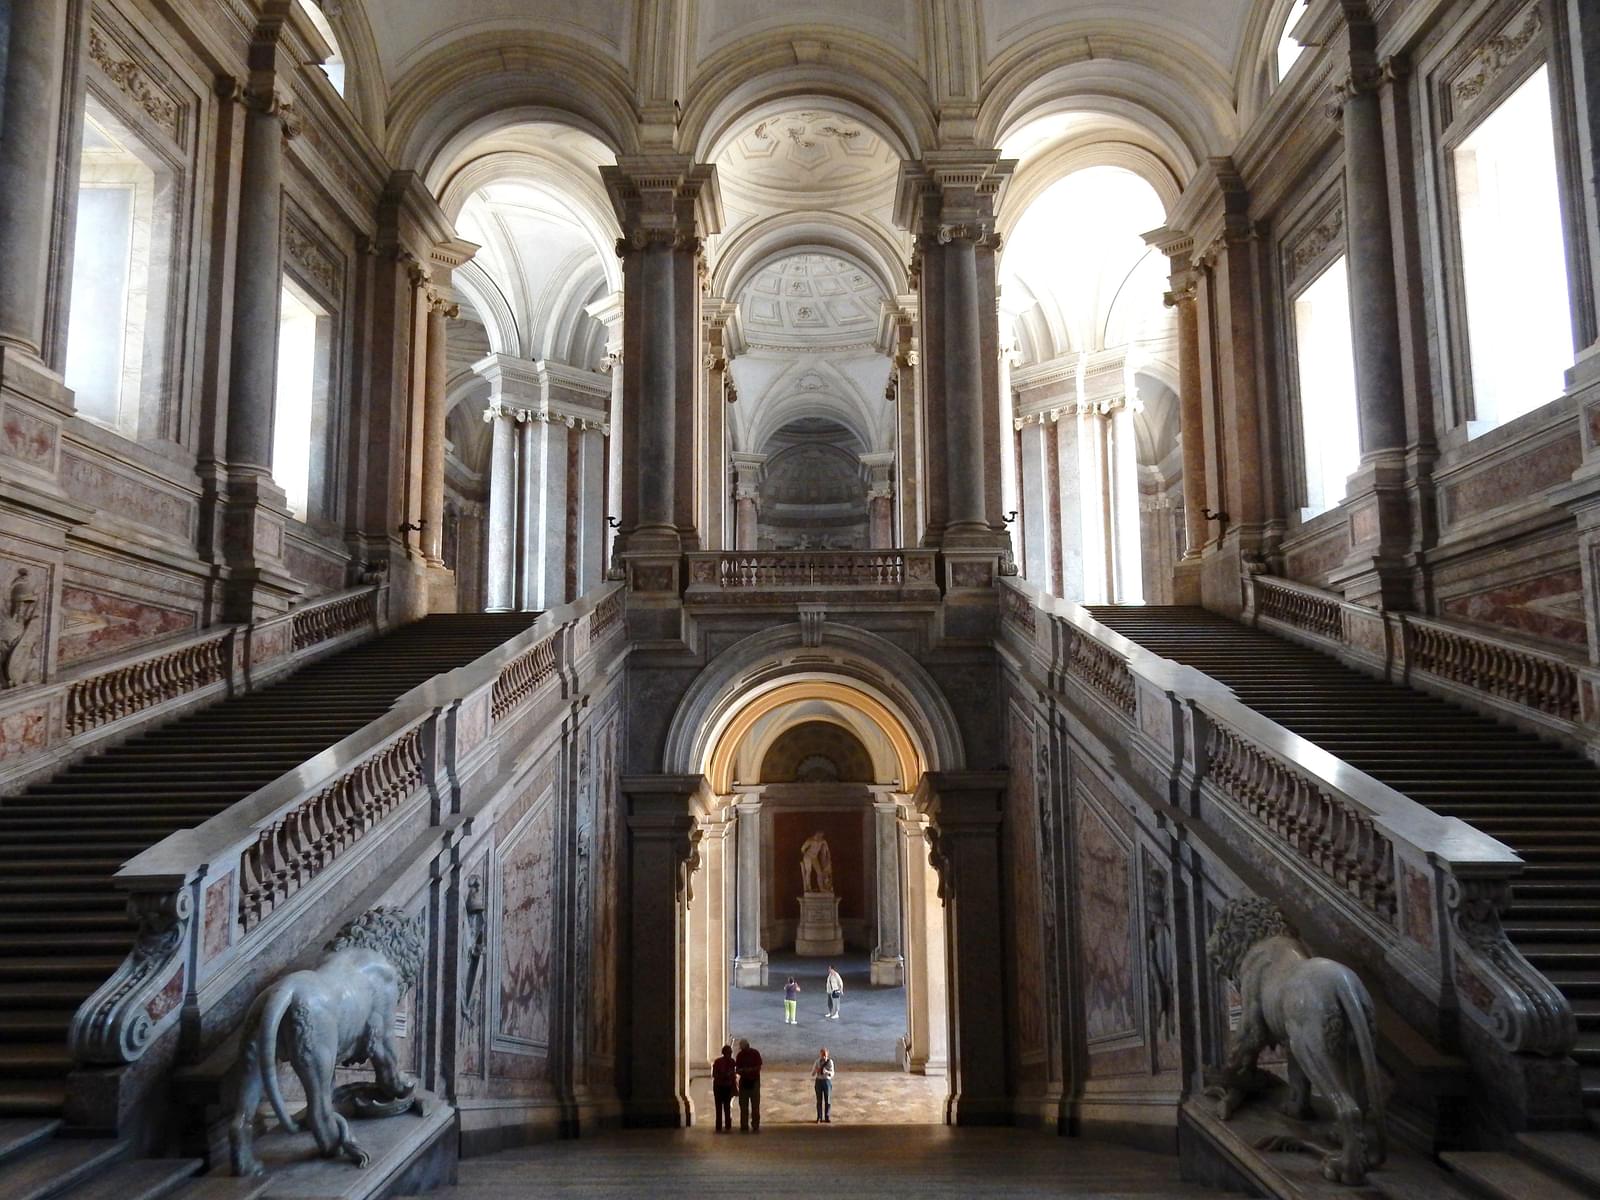 The Central Staircase